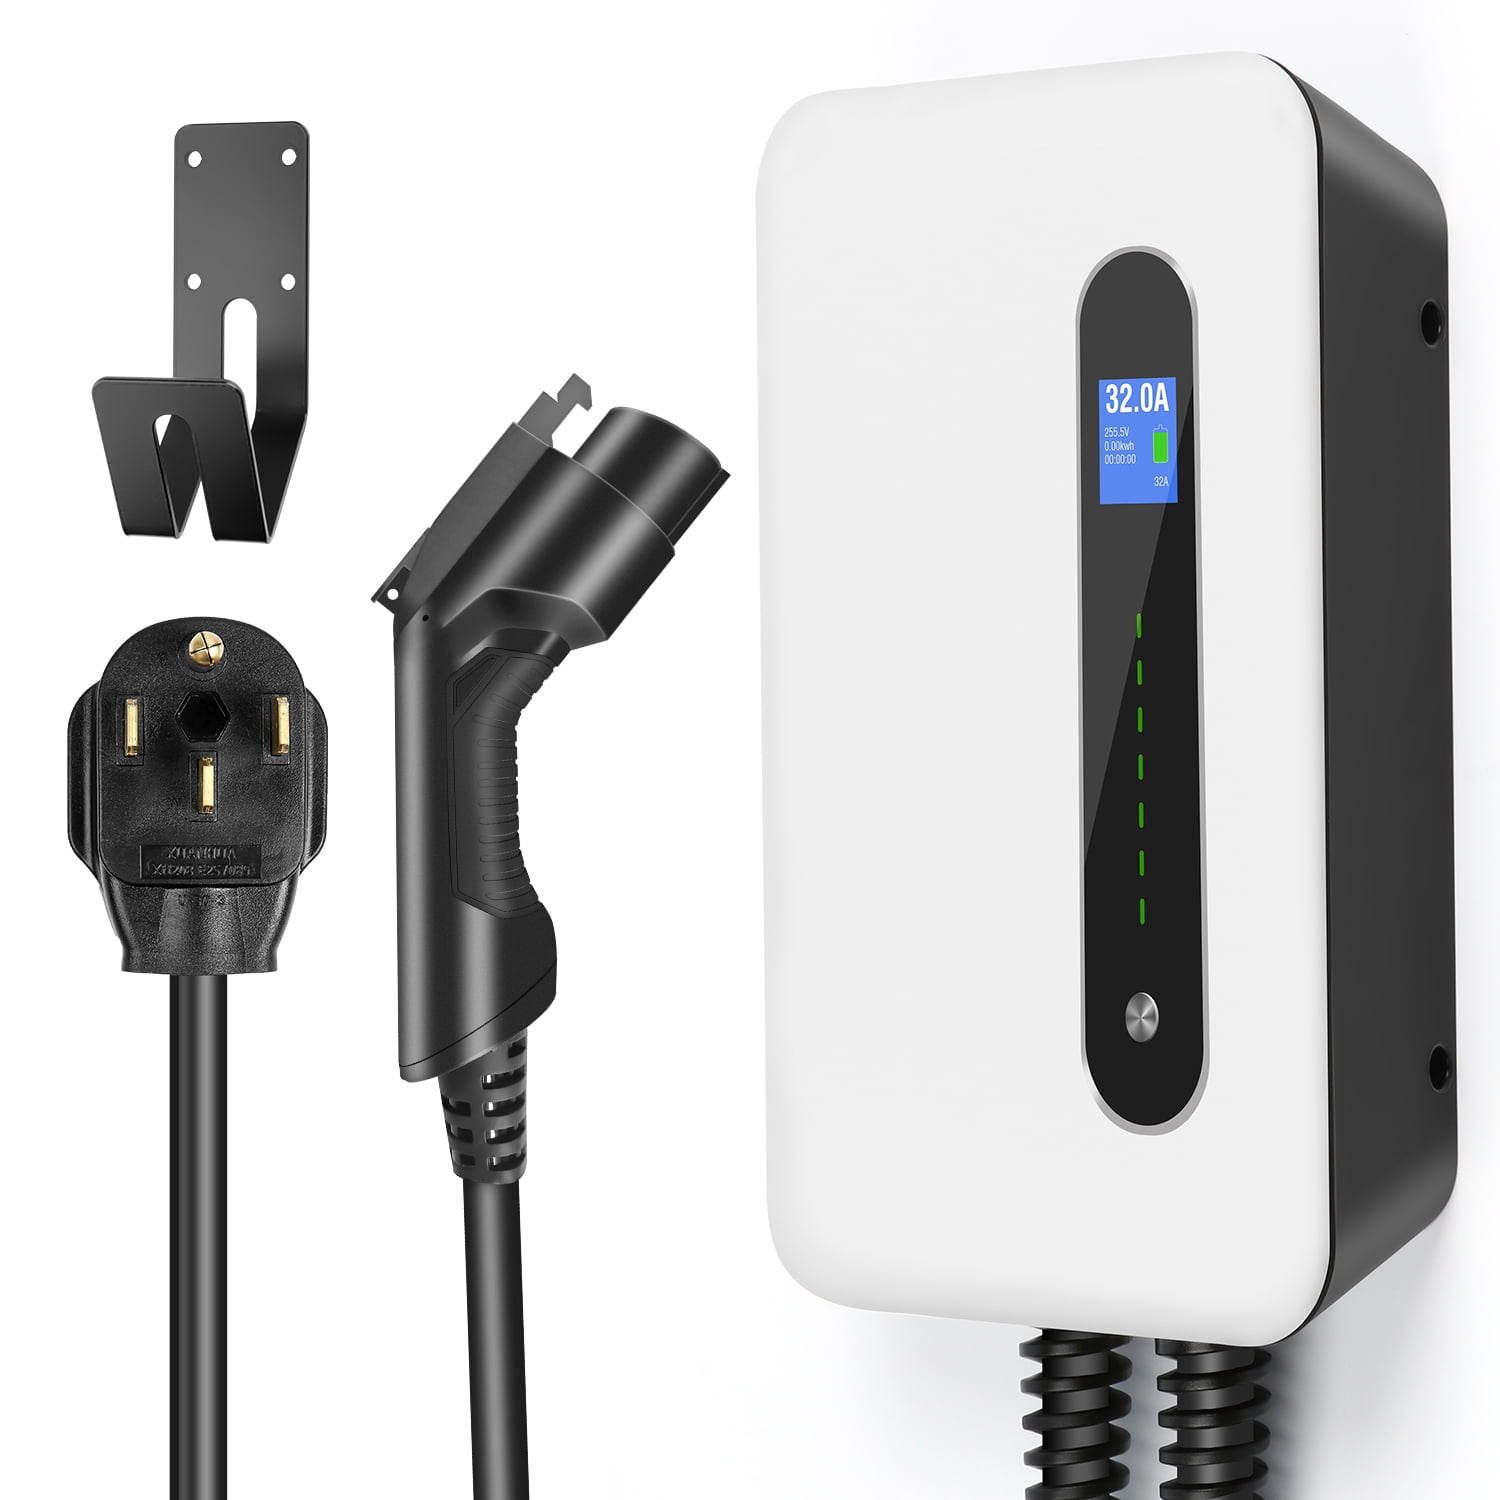 220V 16/24/32 Amp 7.68kW Current Switchable Electric Vehicle Charger with Type 1 & NEMA 14-50 Plug for SAE J1772 Standard EV Cars 20ft Cable astoneves Level 2 EV Charger 